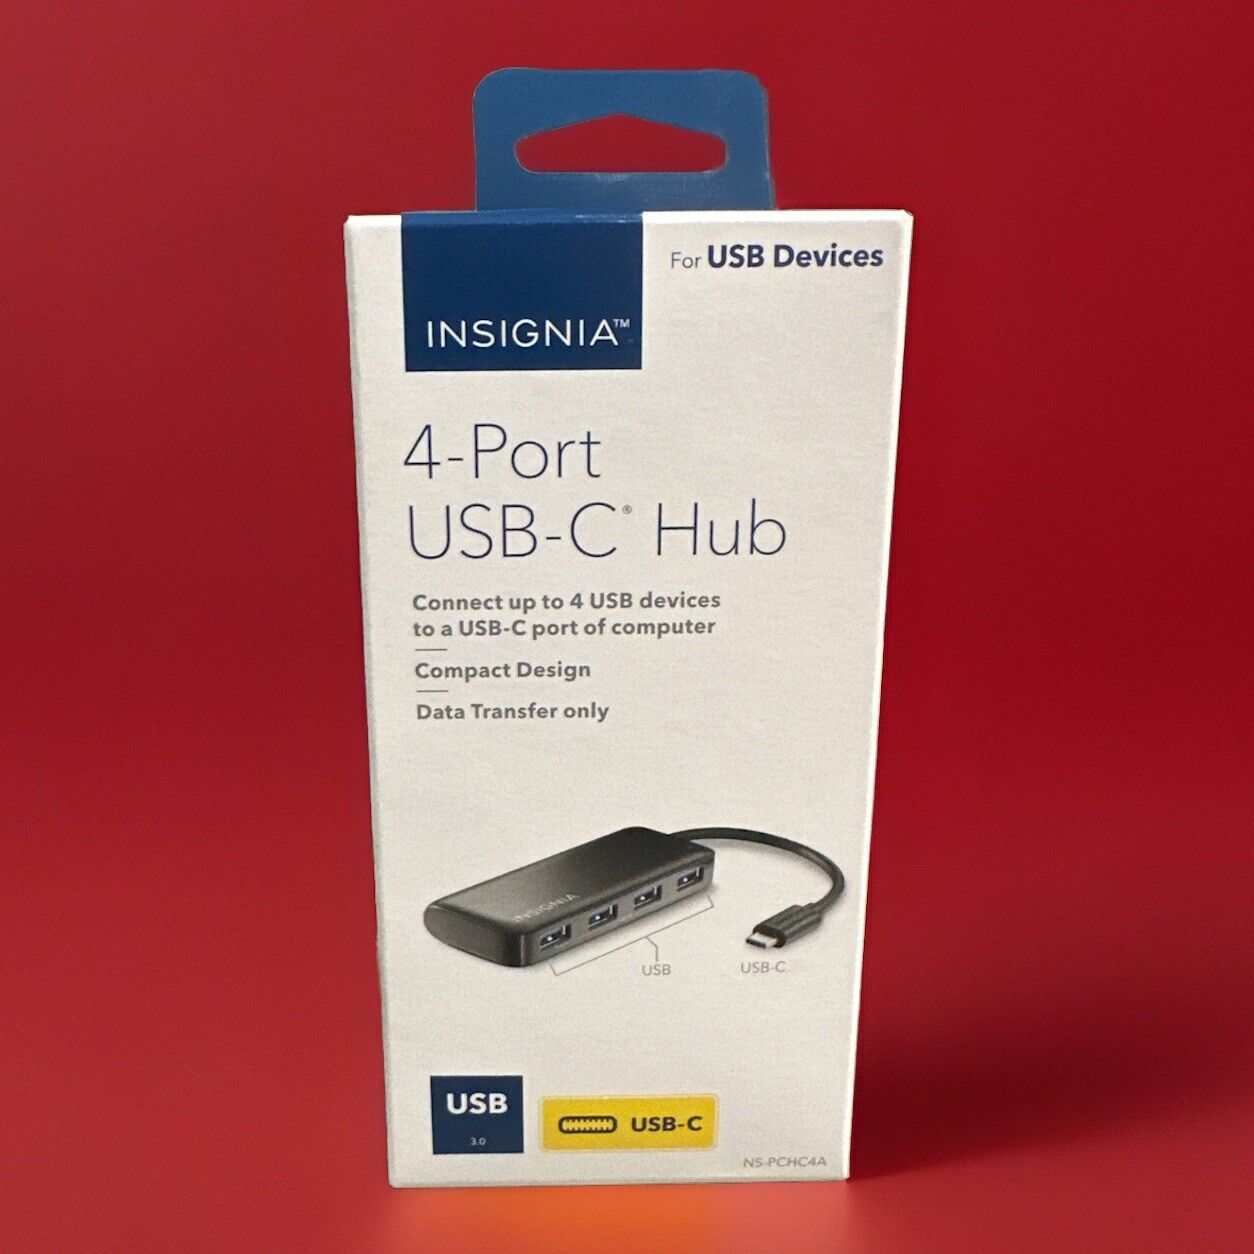 INSIGNIA 4-Port USB-C Hub For USB devices compact design NS-PCHC4A